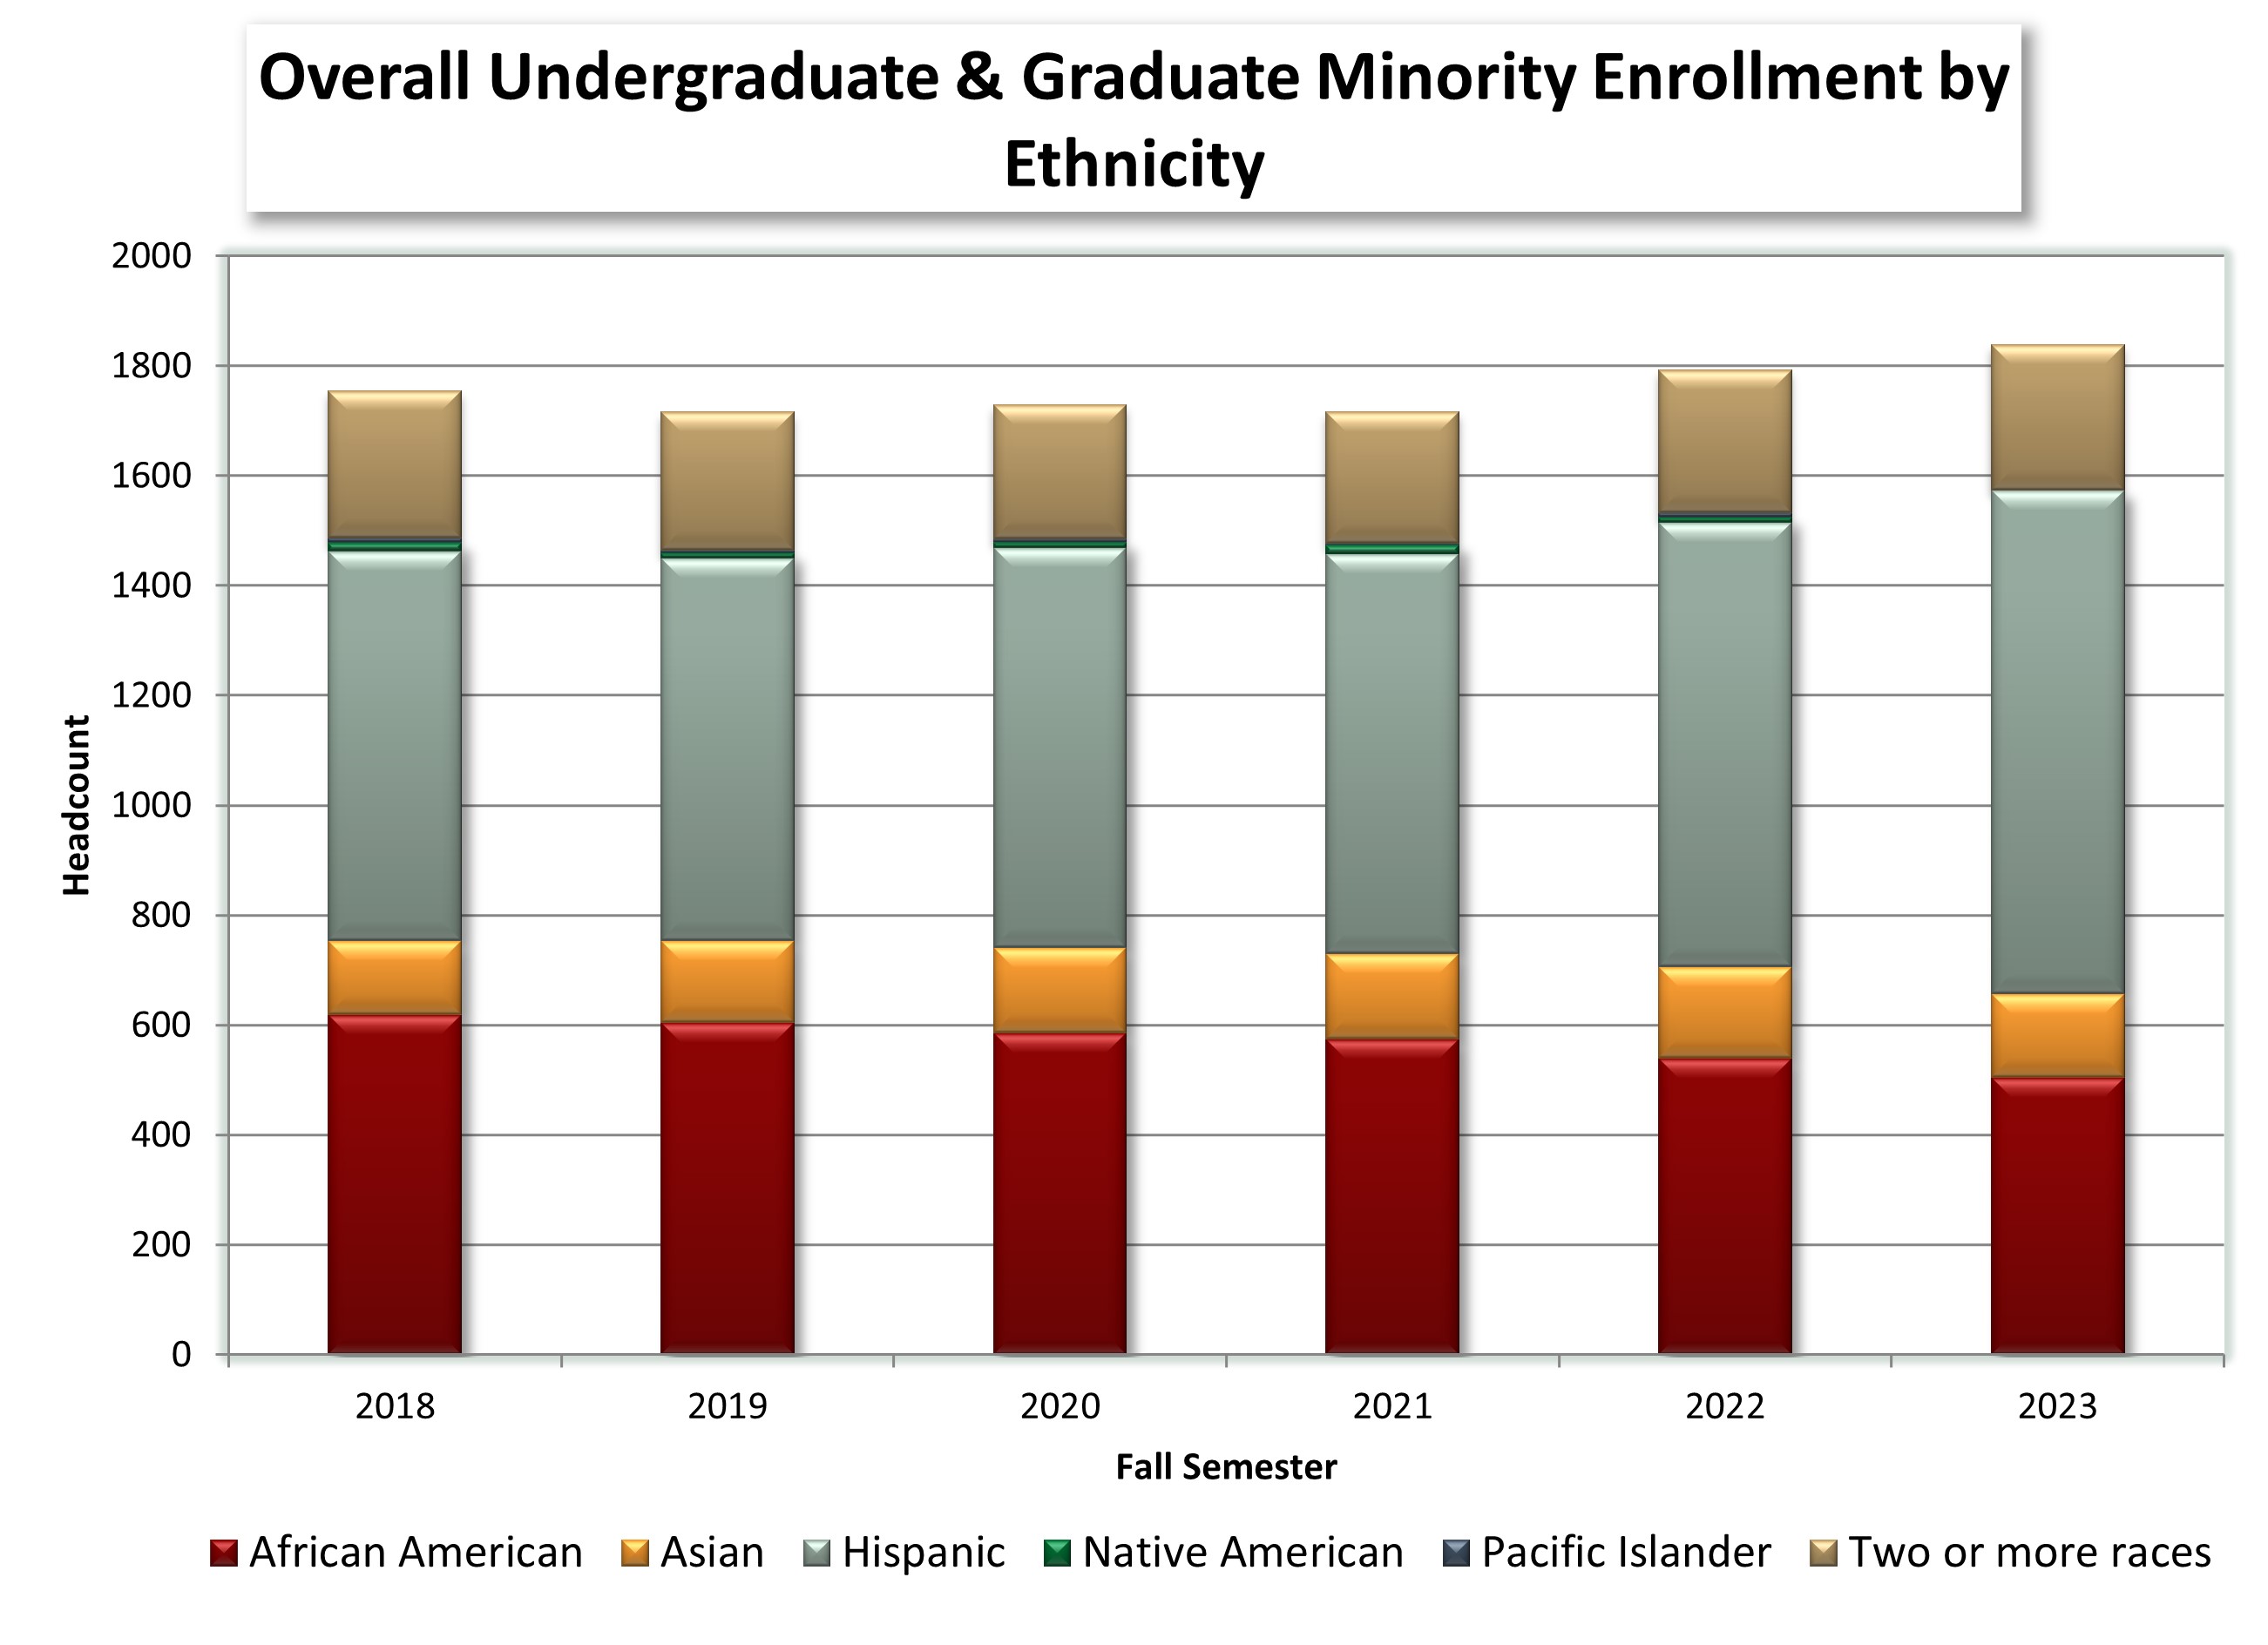 Overall Minority Enrollment by Ethnicity chart